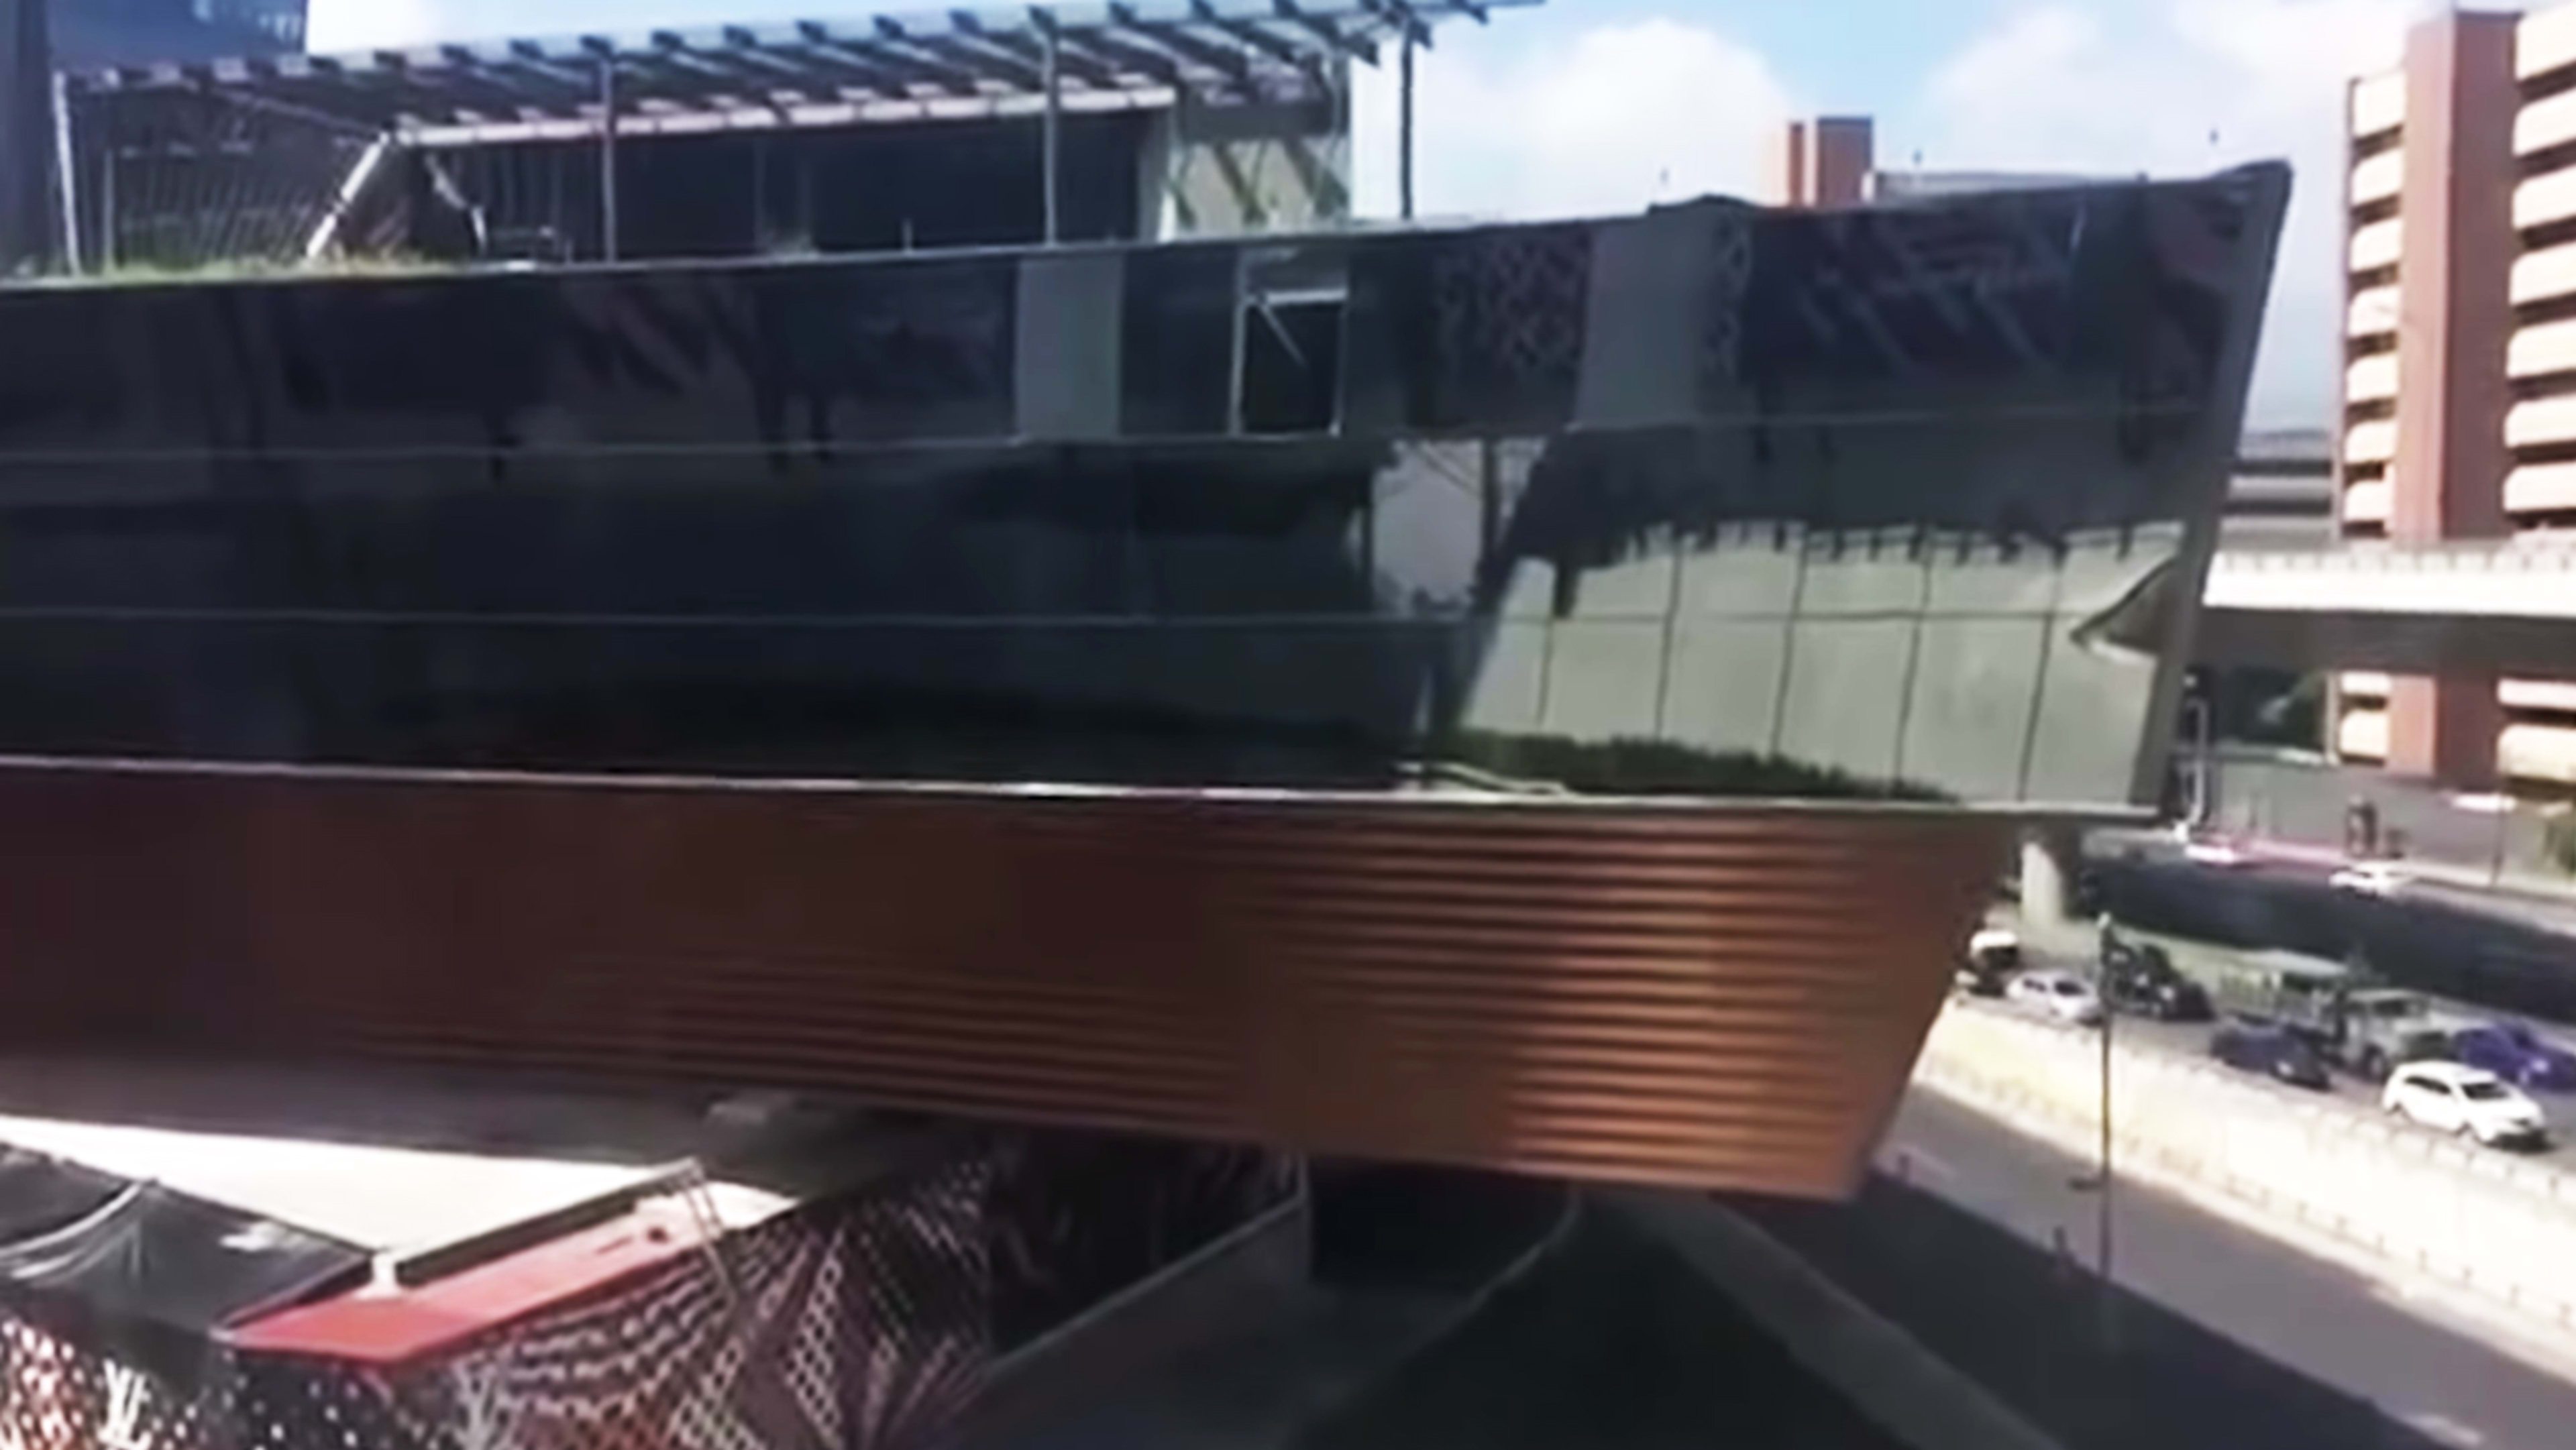 Watch a newly built luxury mall collapse in Mexico City in this stunning video